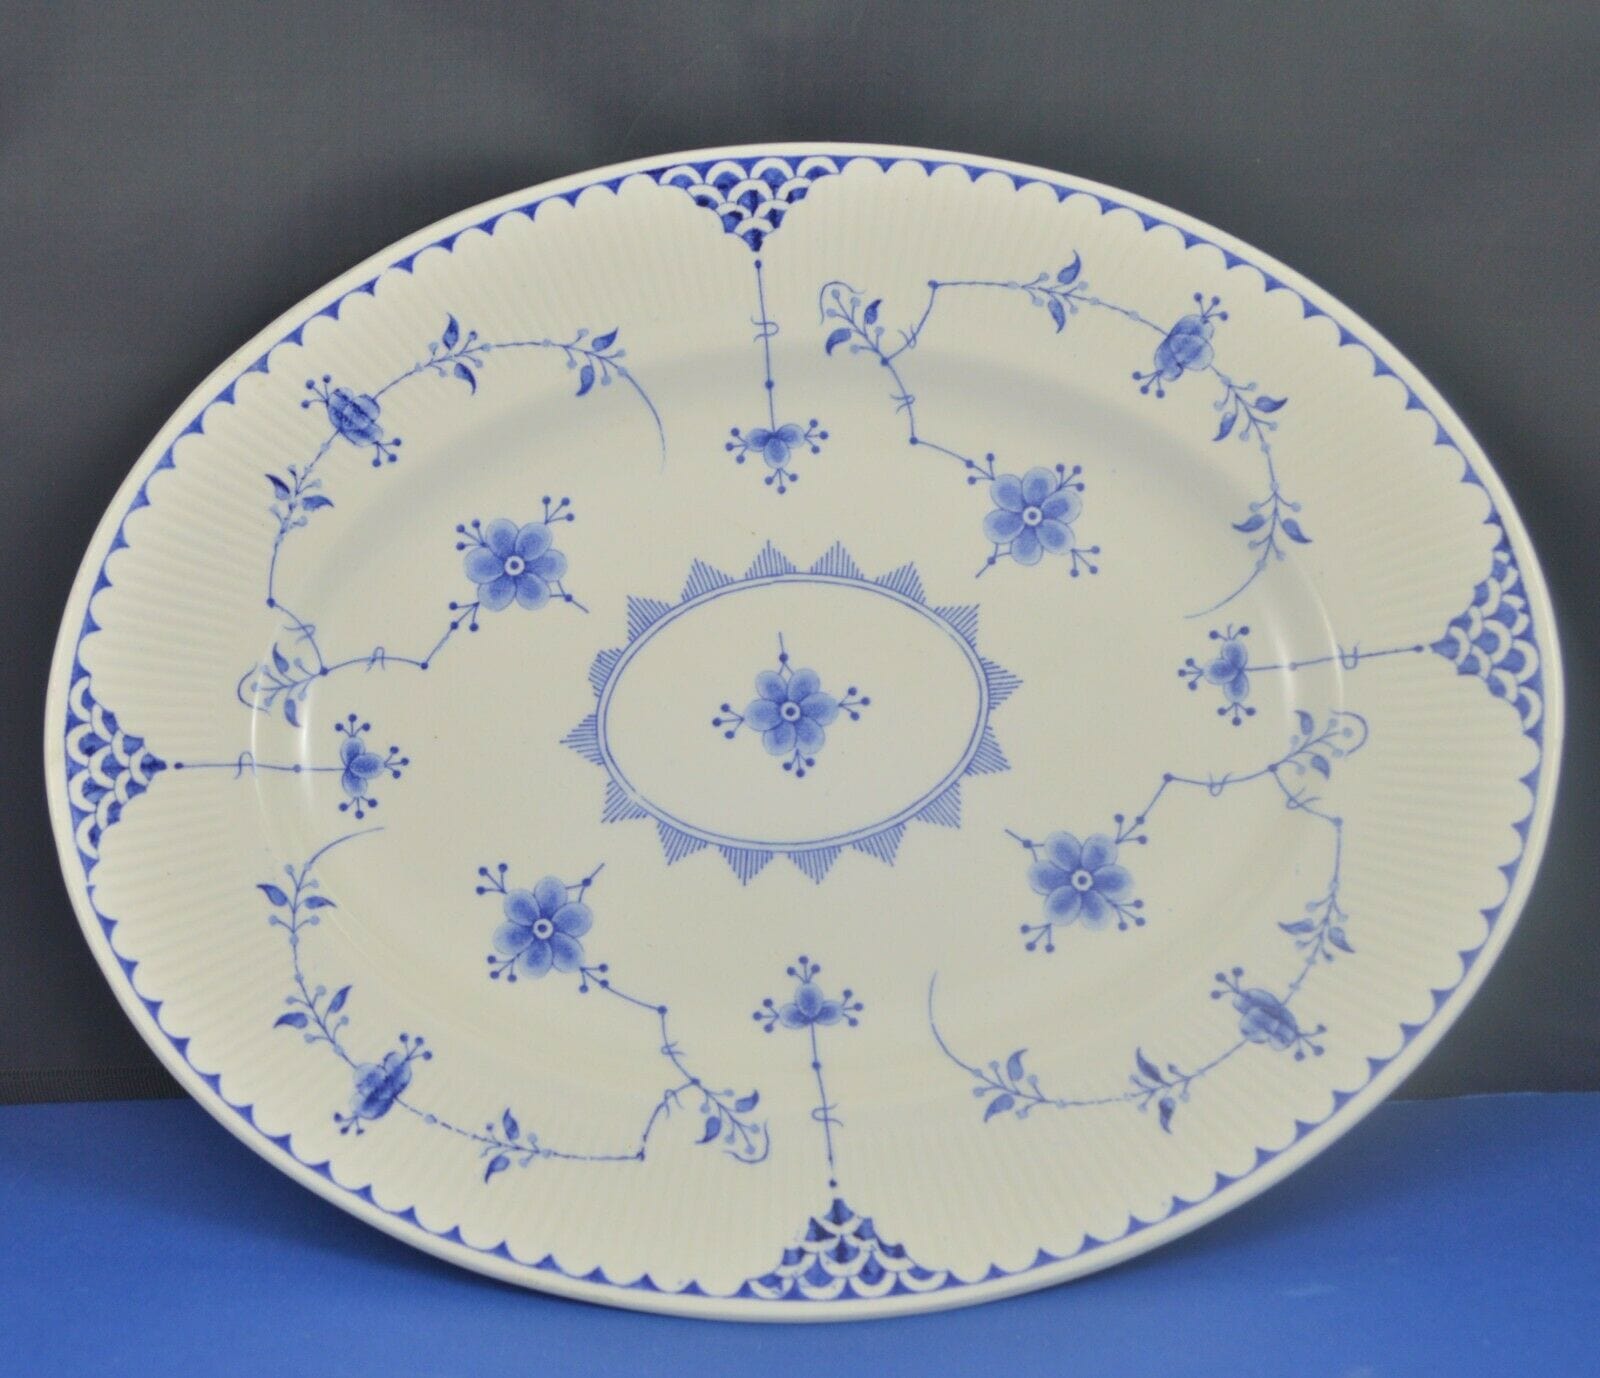 TABLEWARE DENMARK FURNIVALS OVAL SERVING PLATTER 14 X 11 INCHES(PREVIOUSLY OWNED)GOOD CONDITION - TMD167207